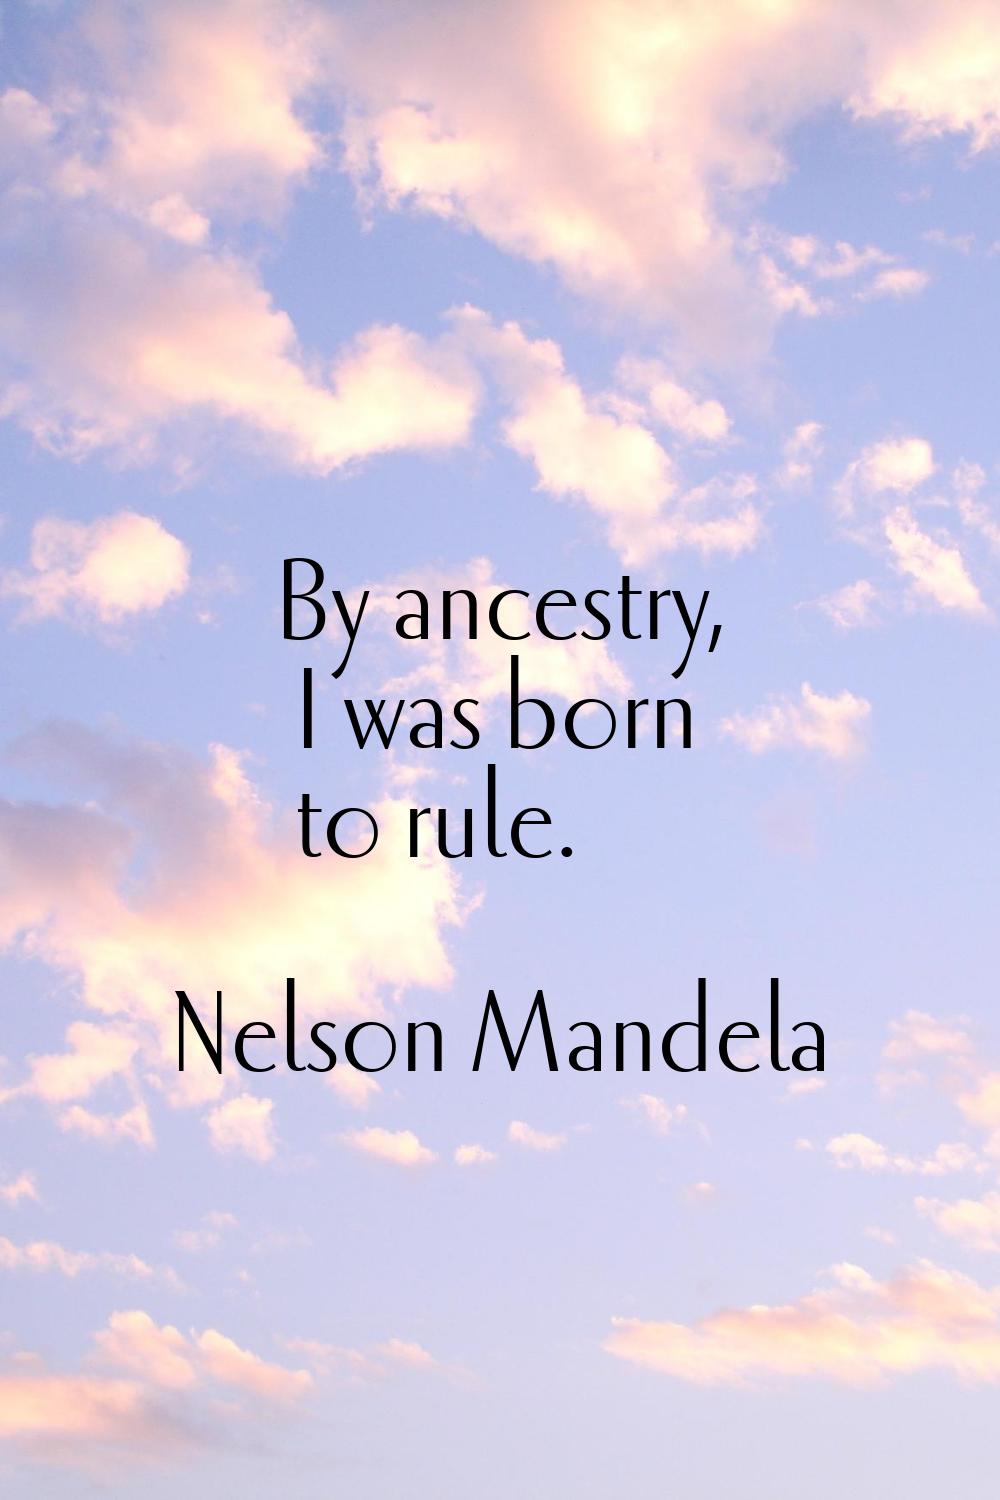 By ancestry, I was born to rule.